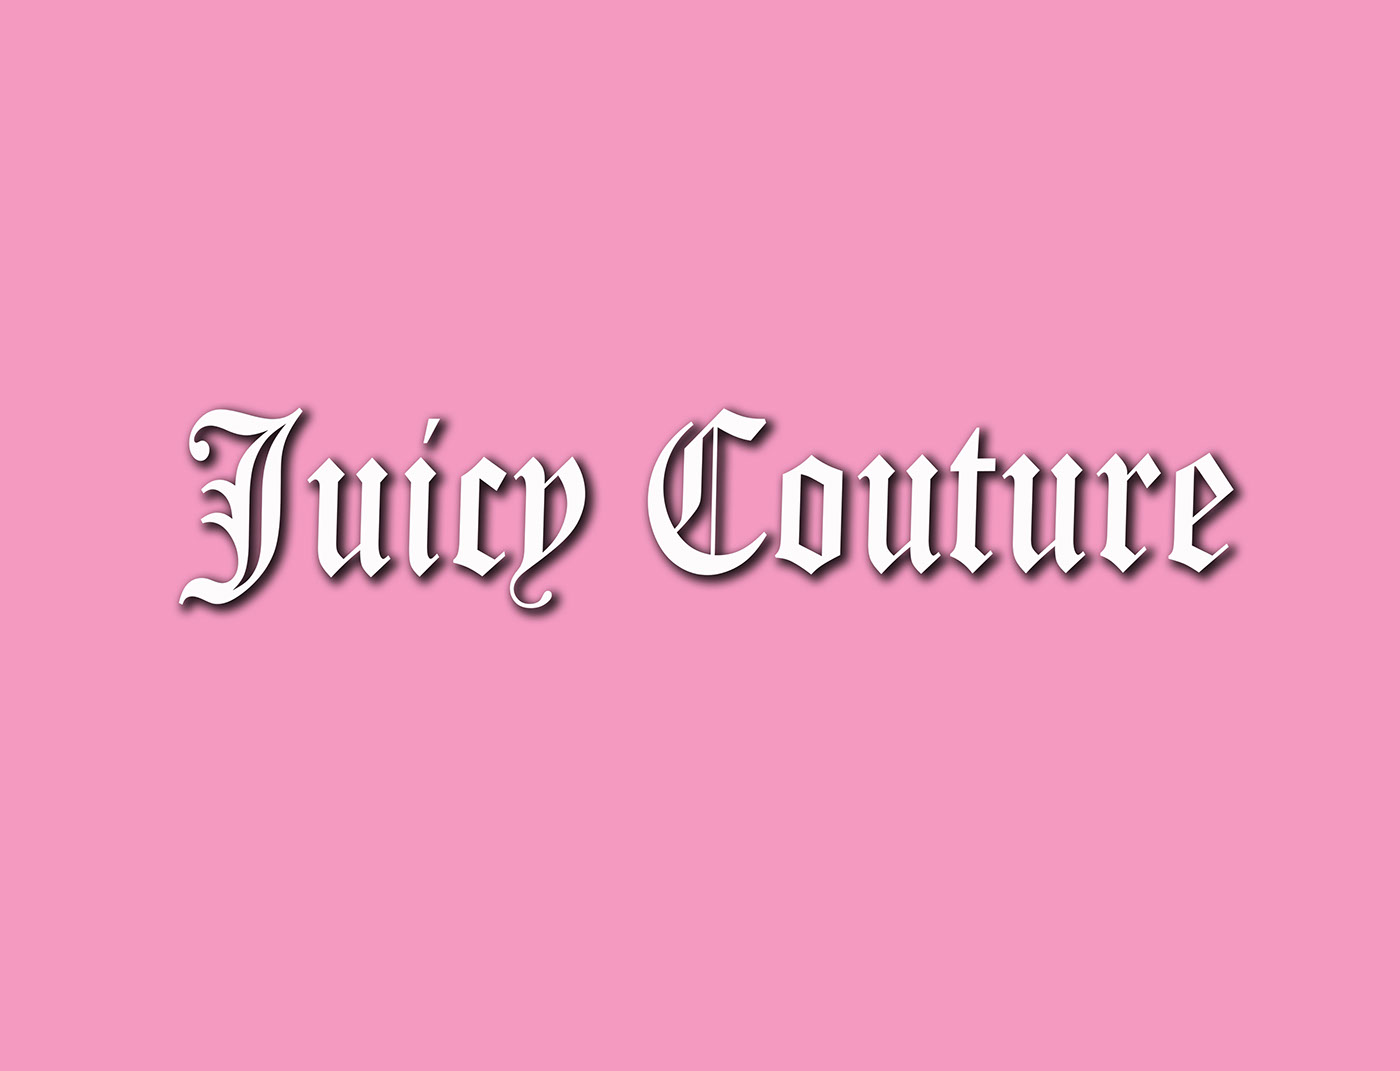 Juicy Couture on Behance